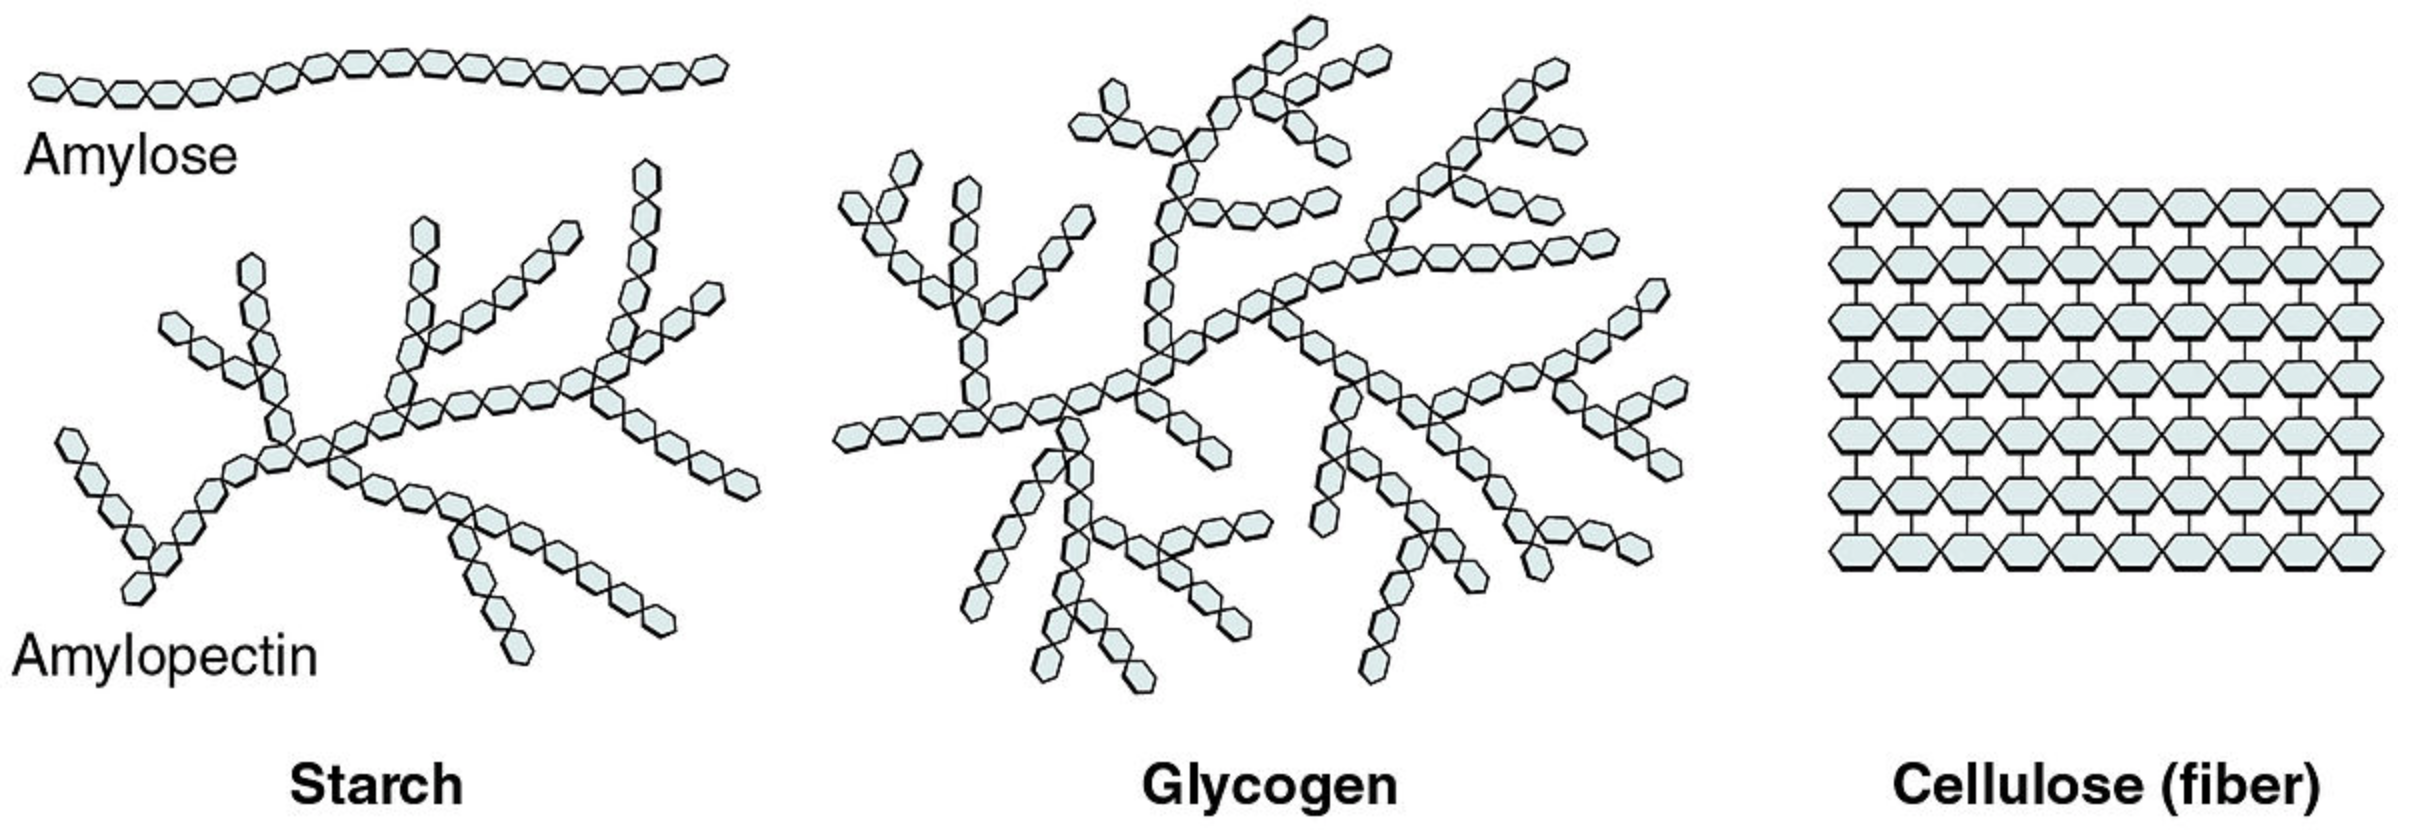 polysaccharides, starch, glycogen, and cellulose